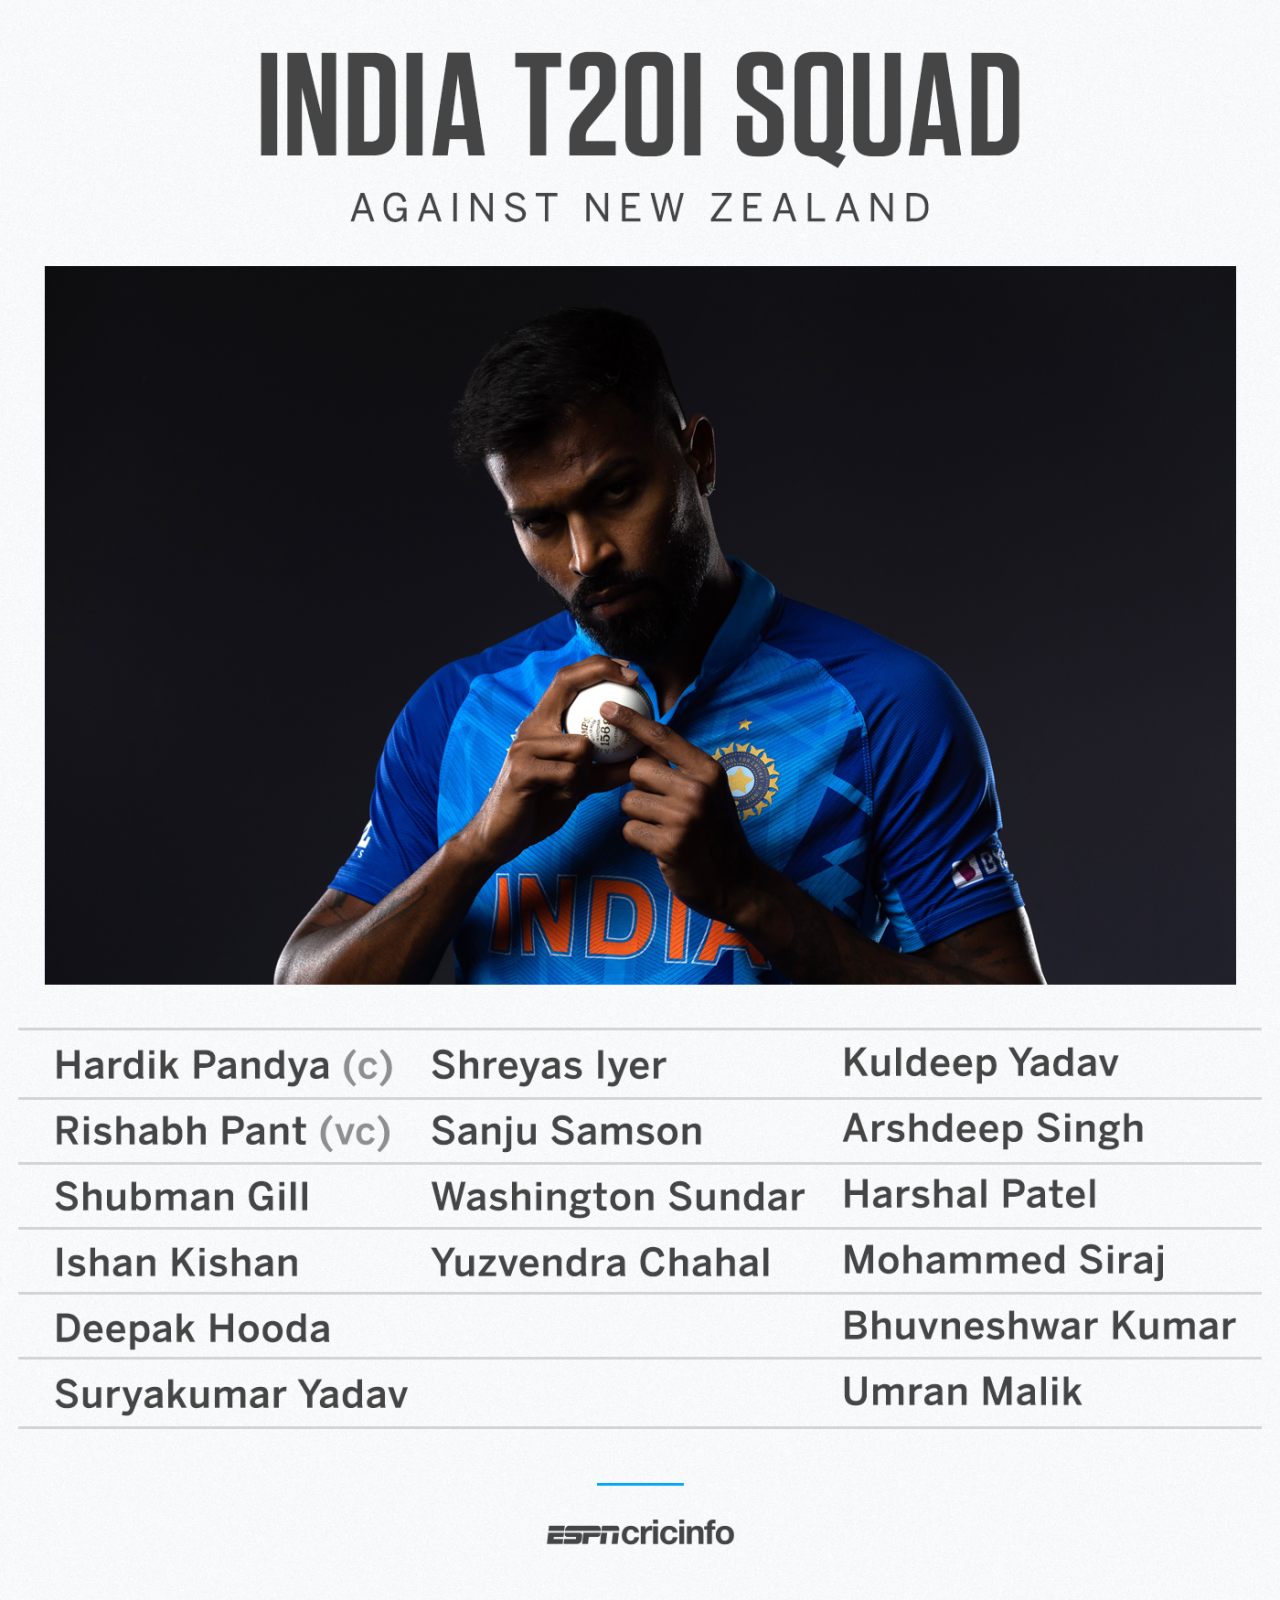 India's squad for the T20Is against New Zealand in November 2022